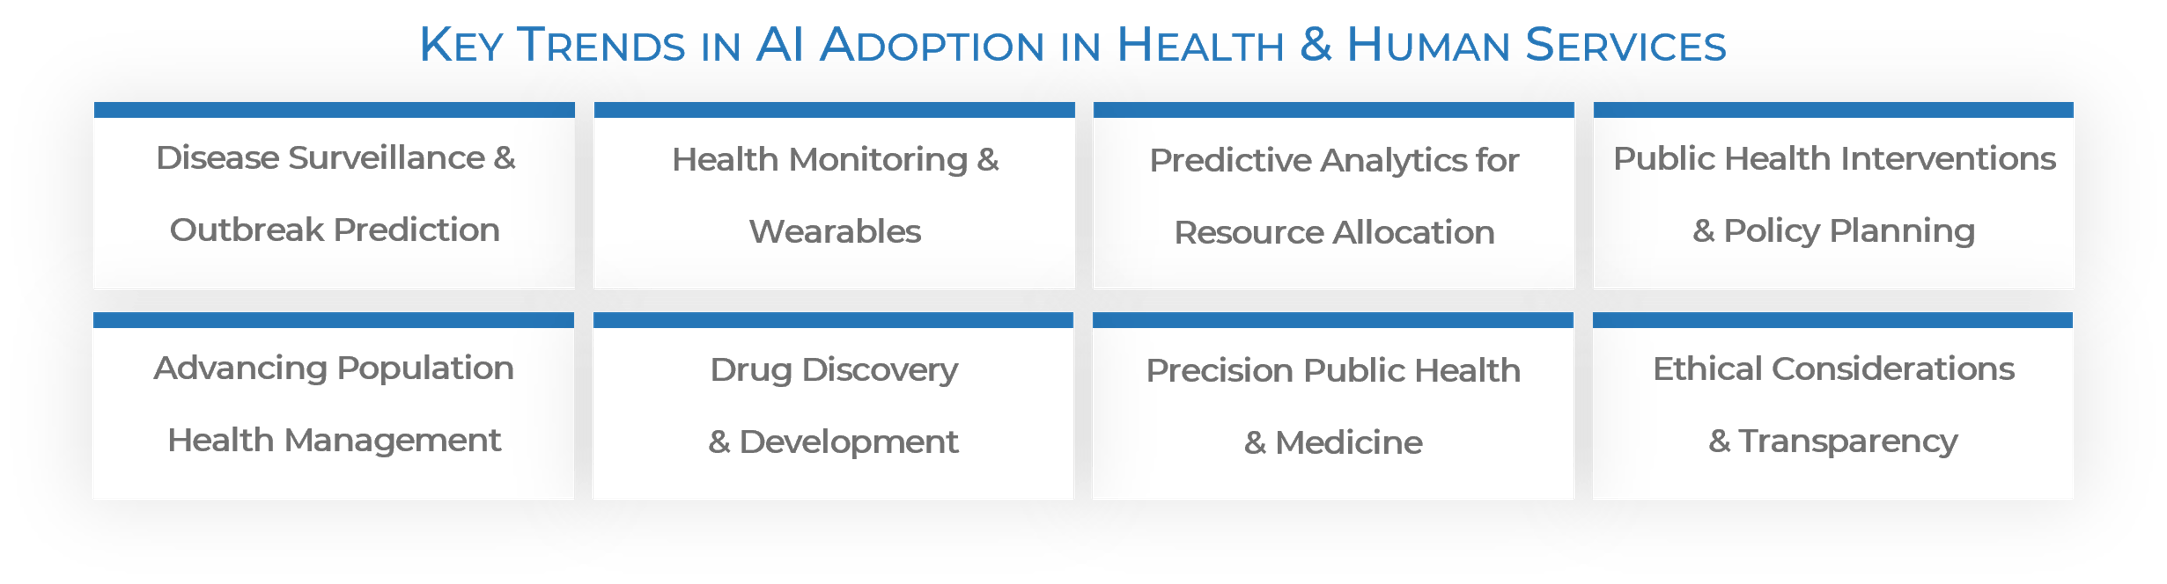 The image contains a screenshot of the Key Trends in AI Adoption in Health & Human Services.